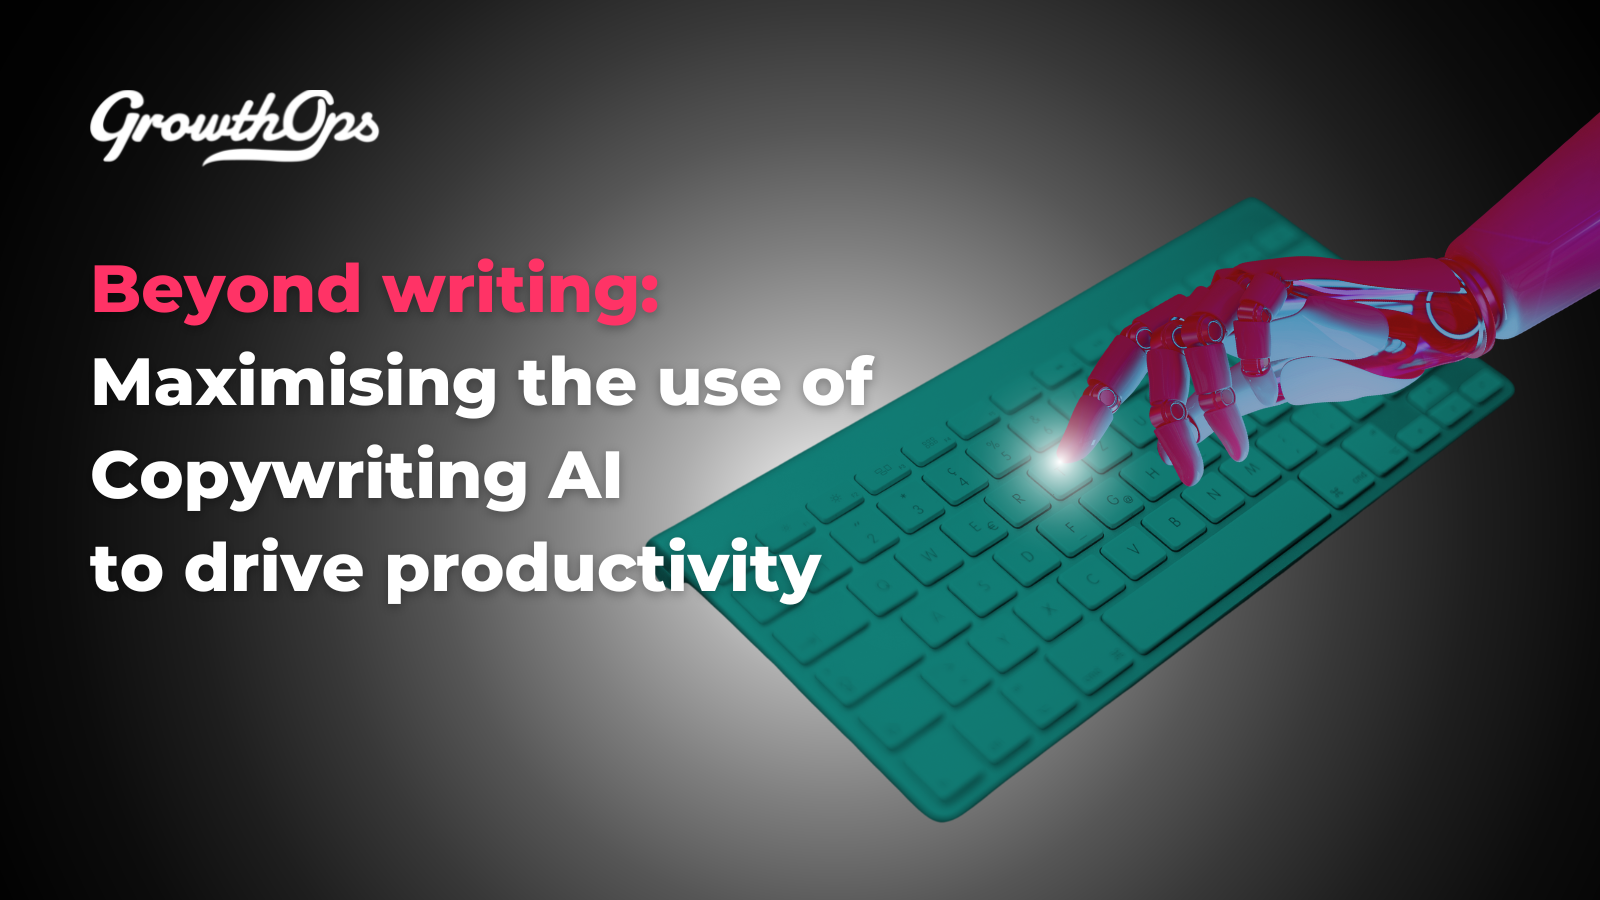 Beyond writing: Maximising the use of Copywriting AI to drive productivity